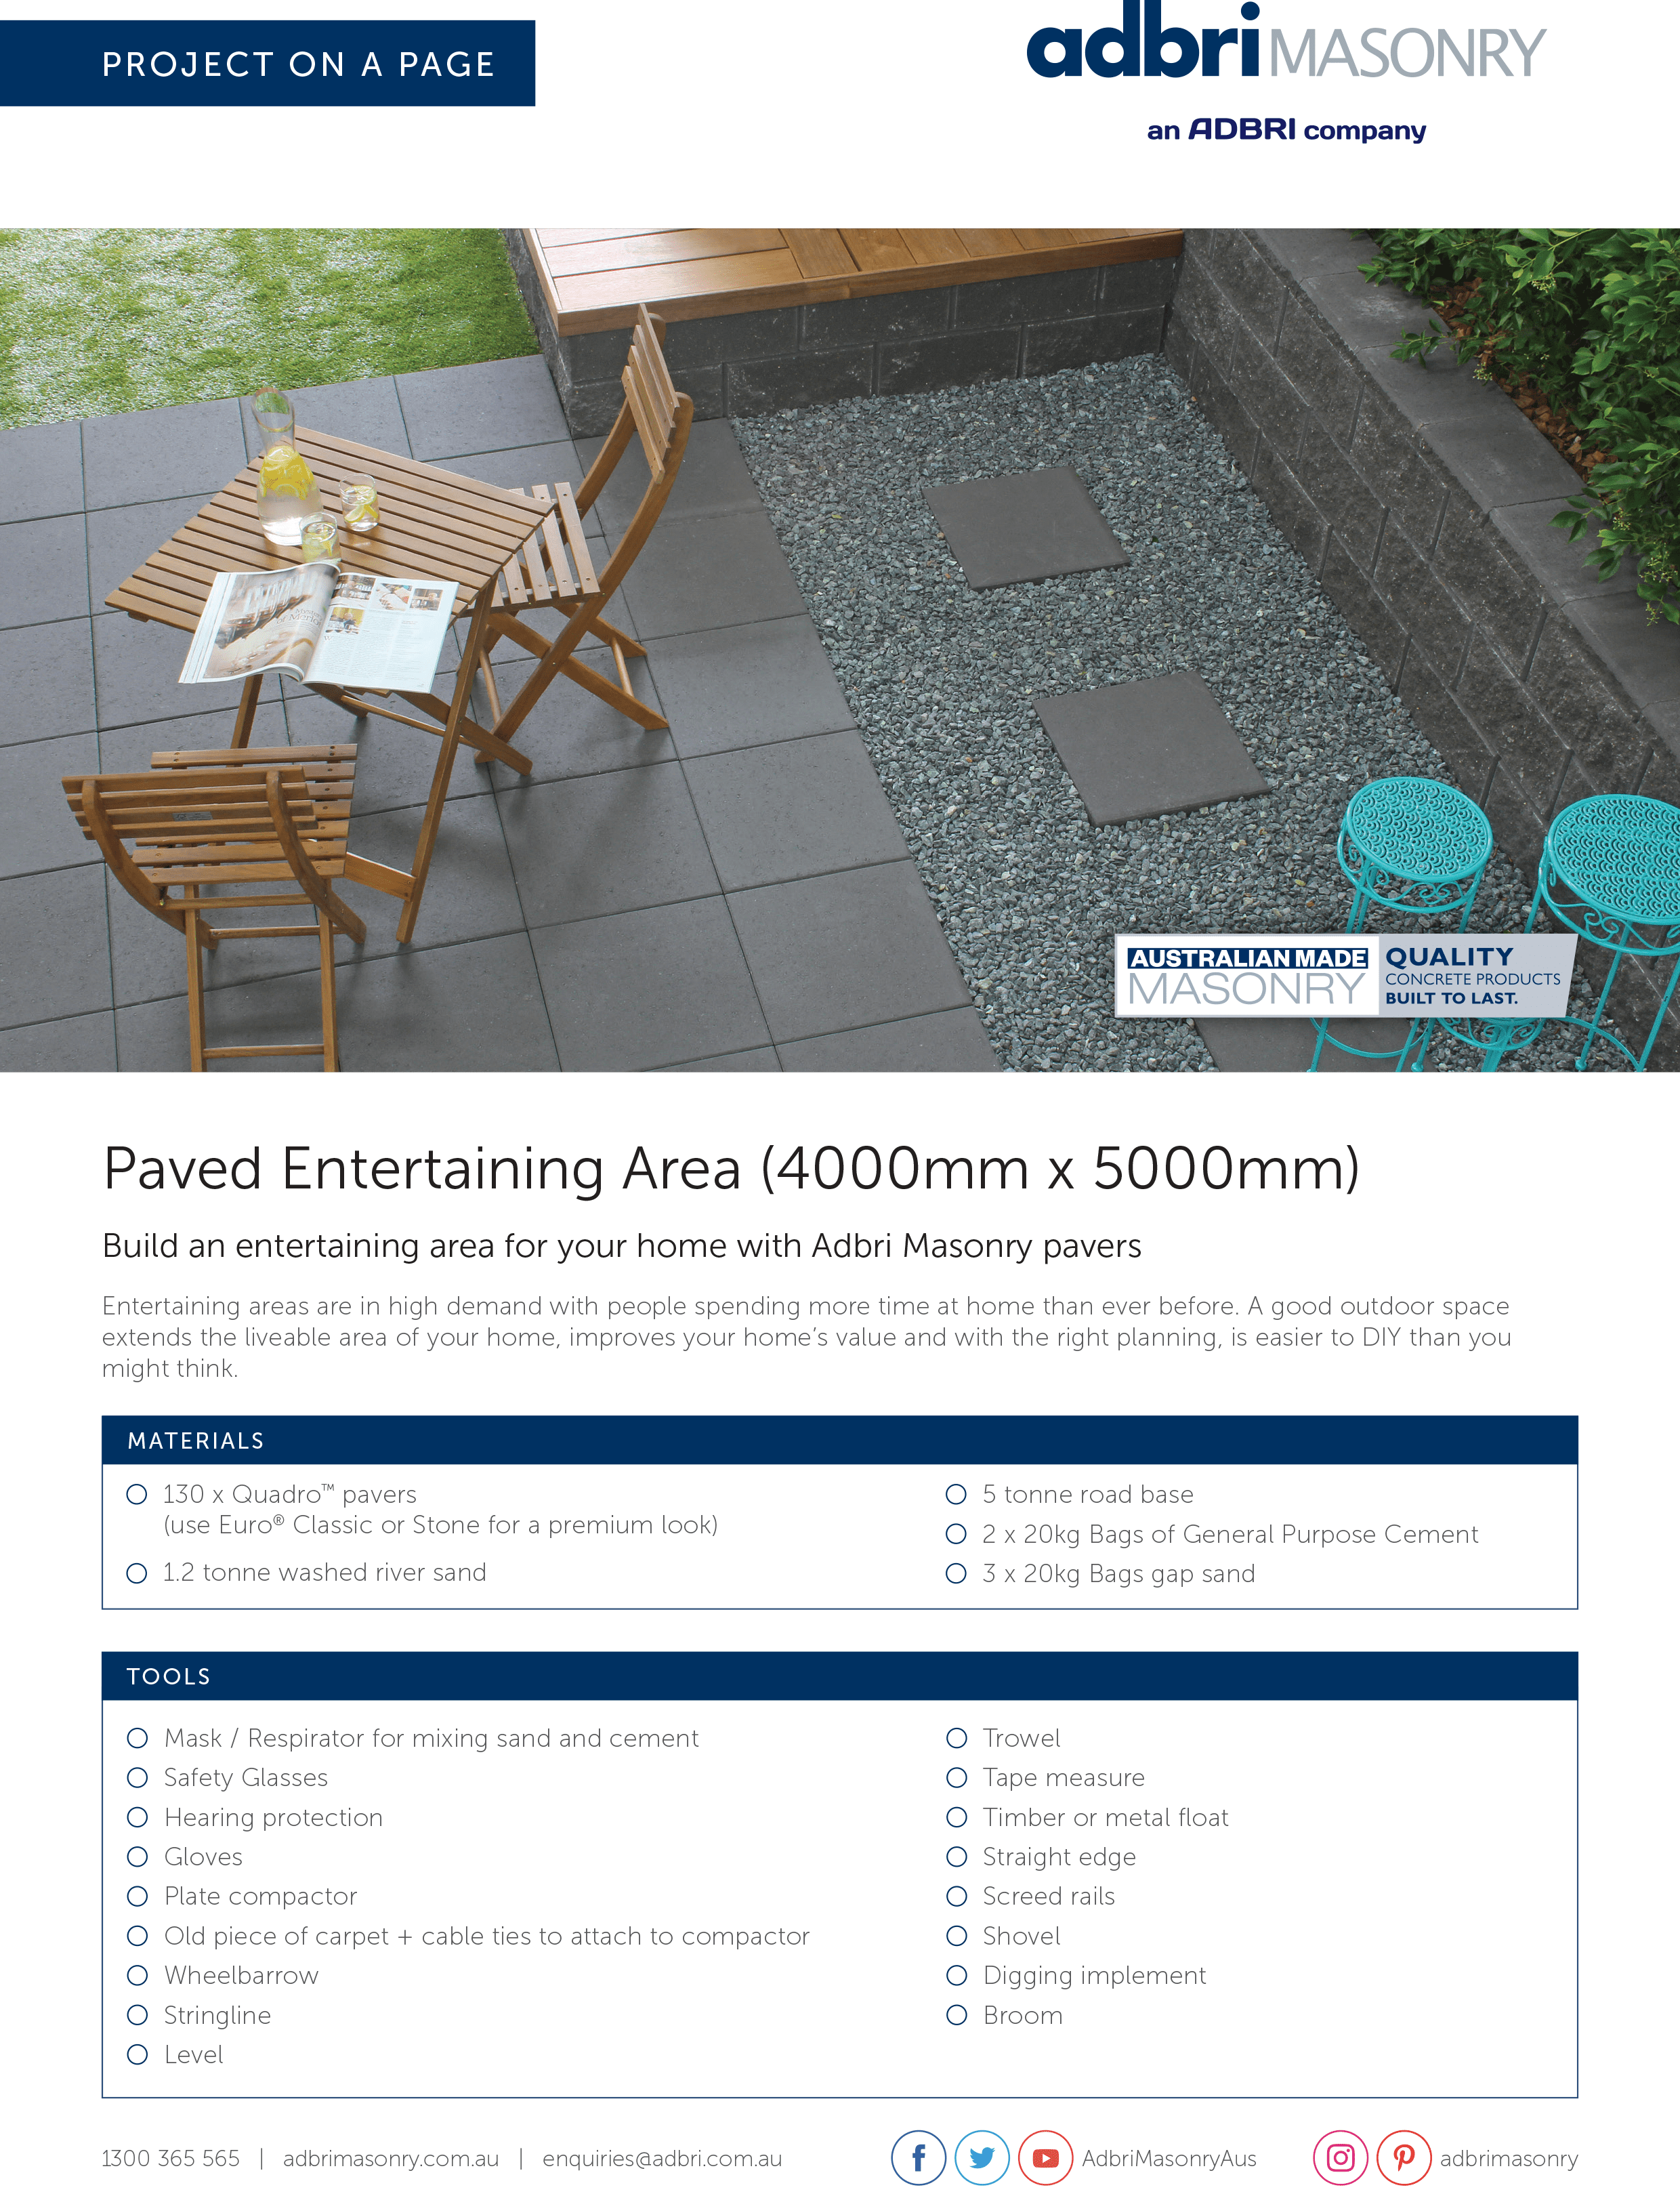 Paved Entertaining Area Project on a Page